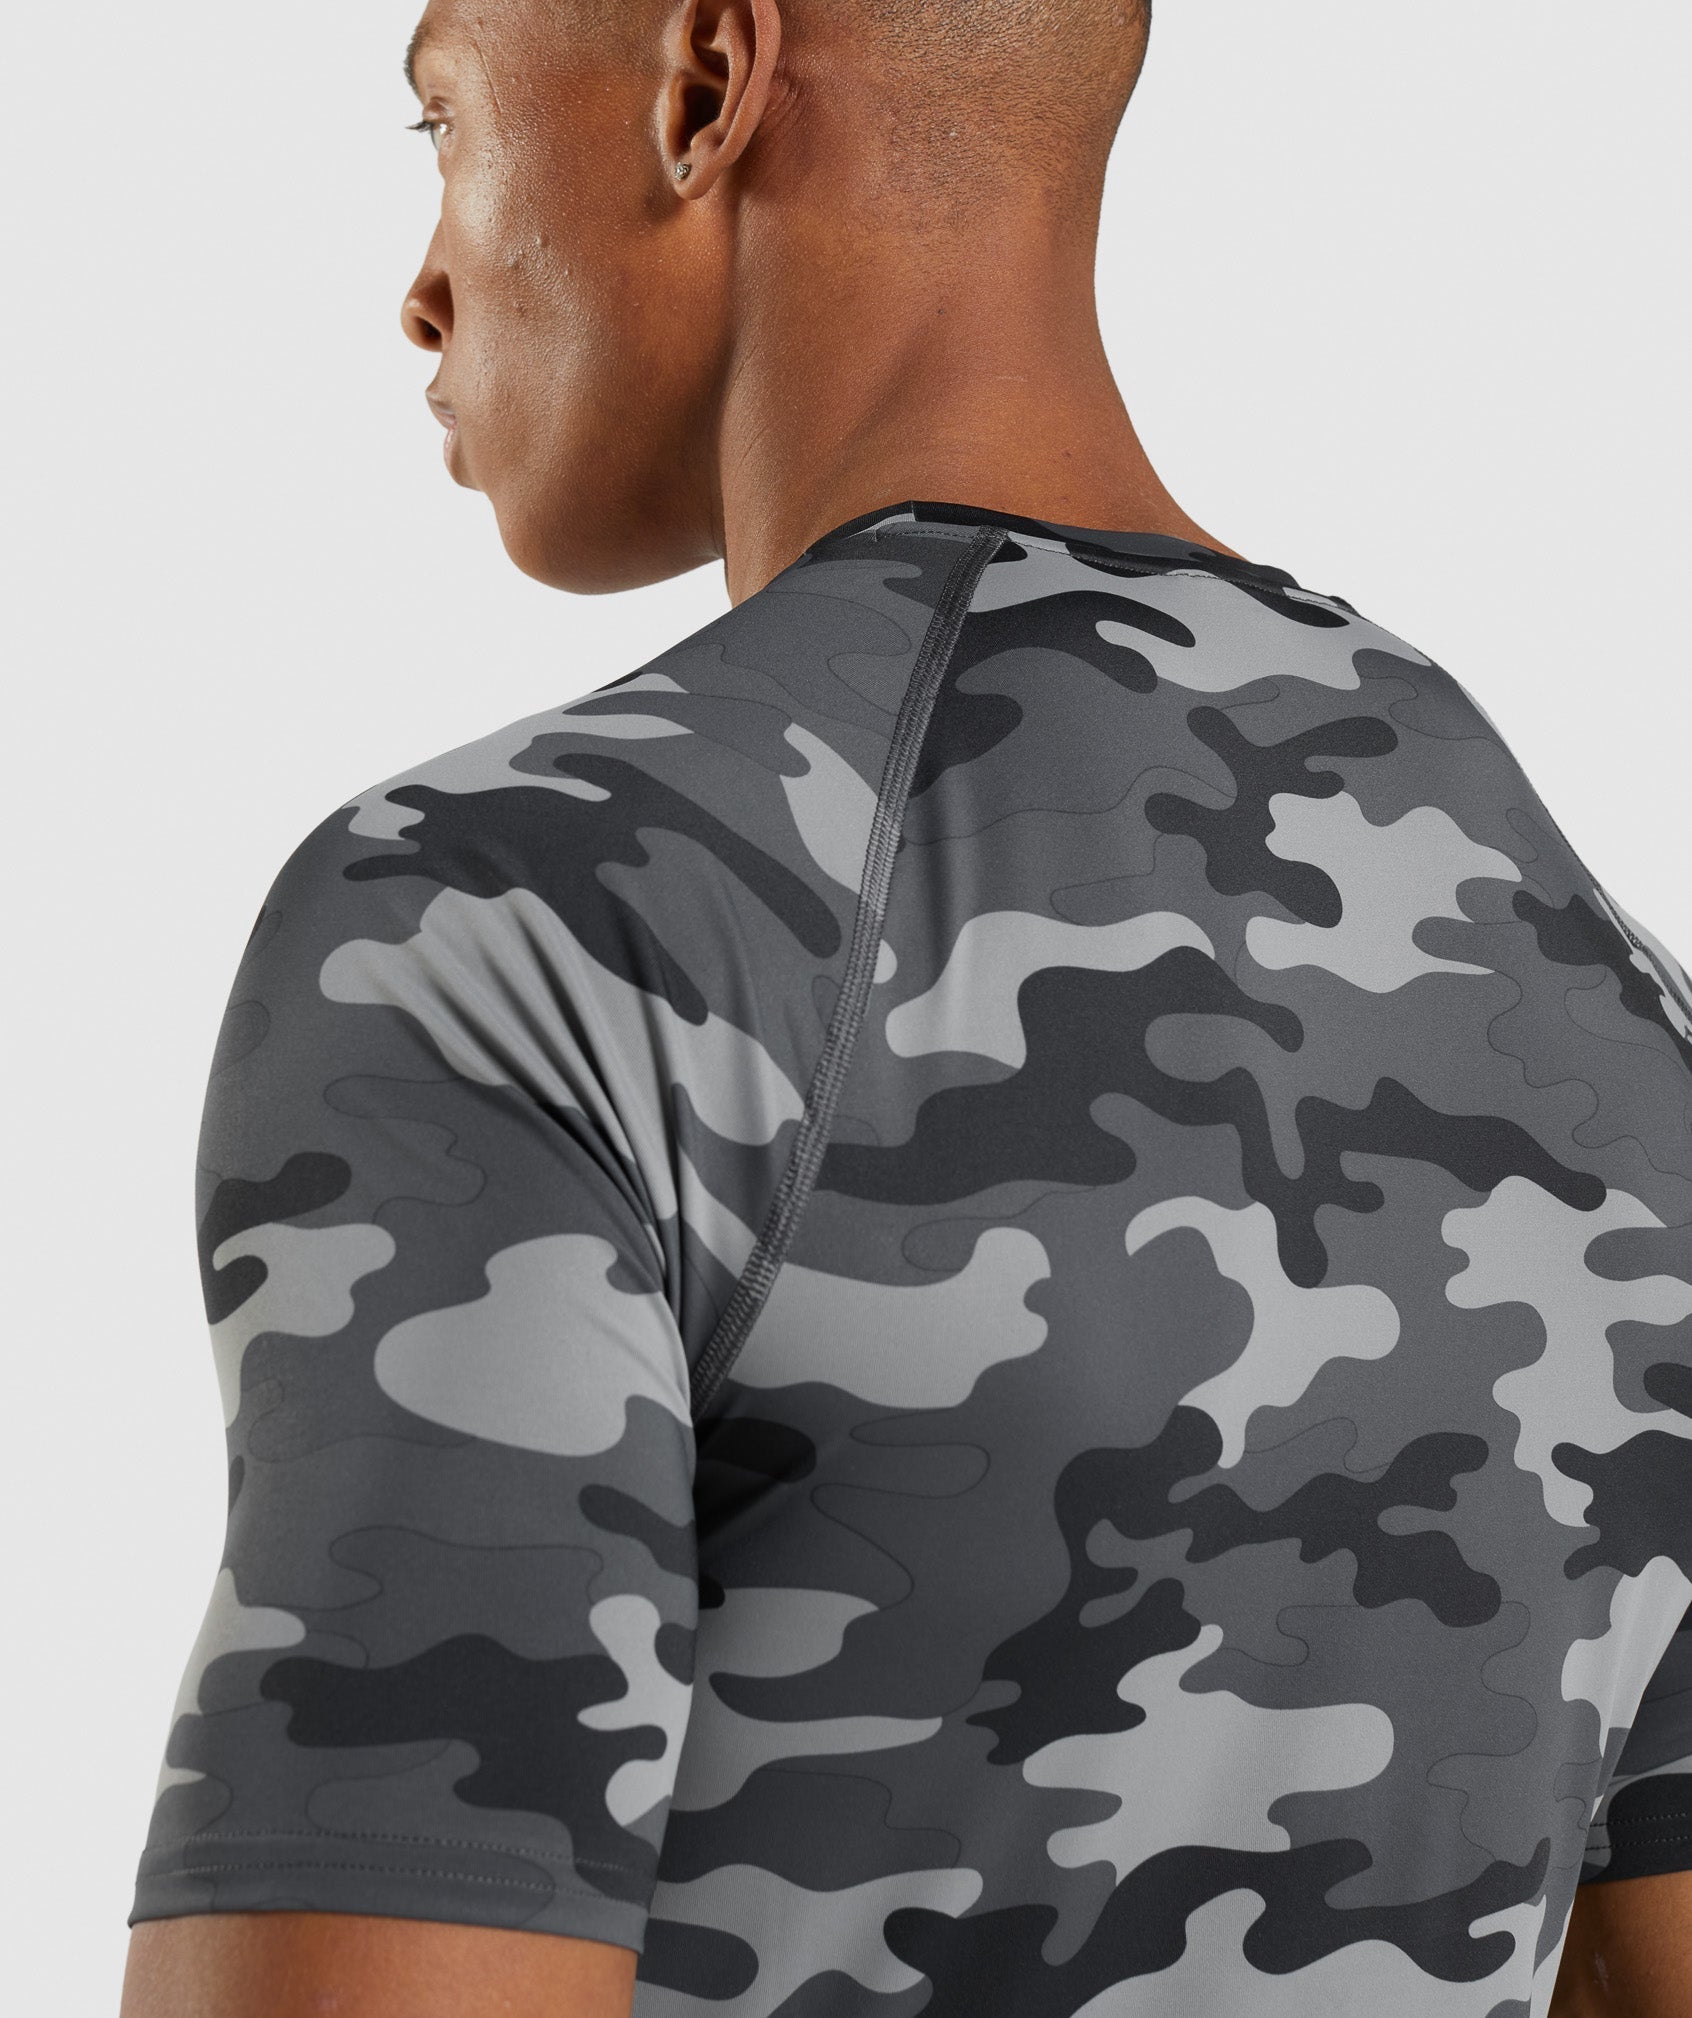 Element Baselayer T-Shirt in Camo Grey Print - view 6